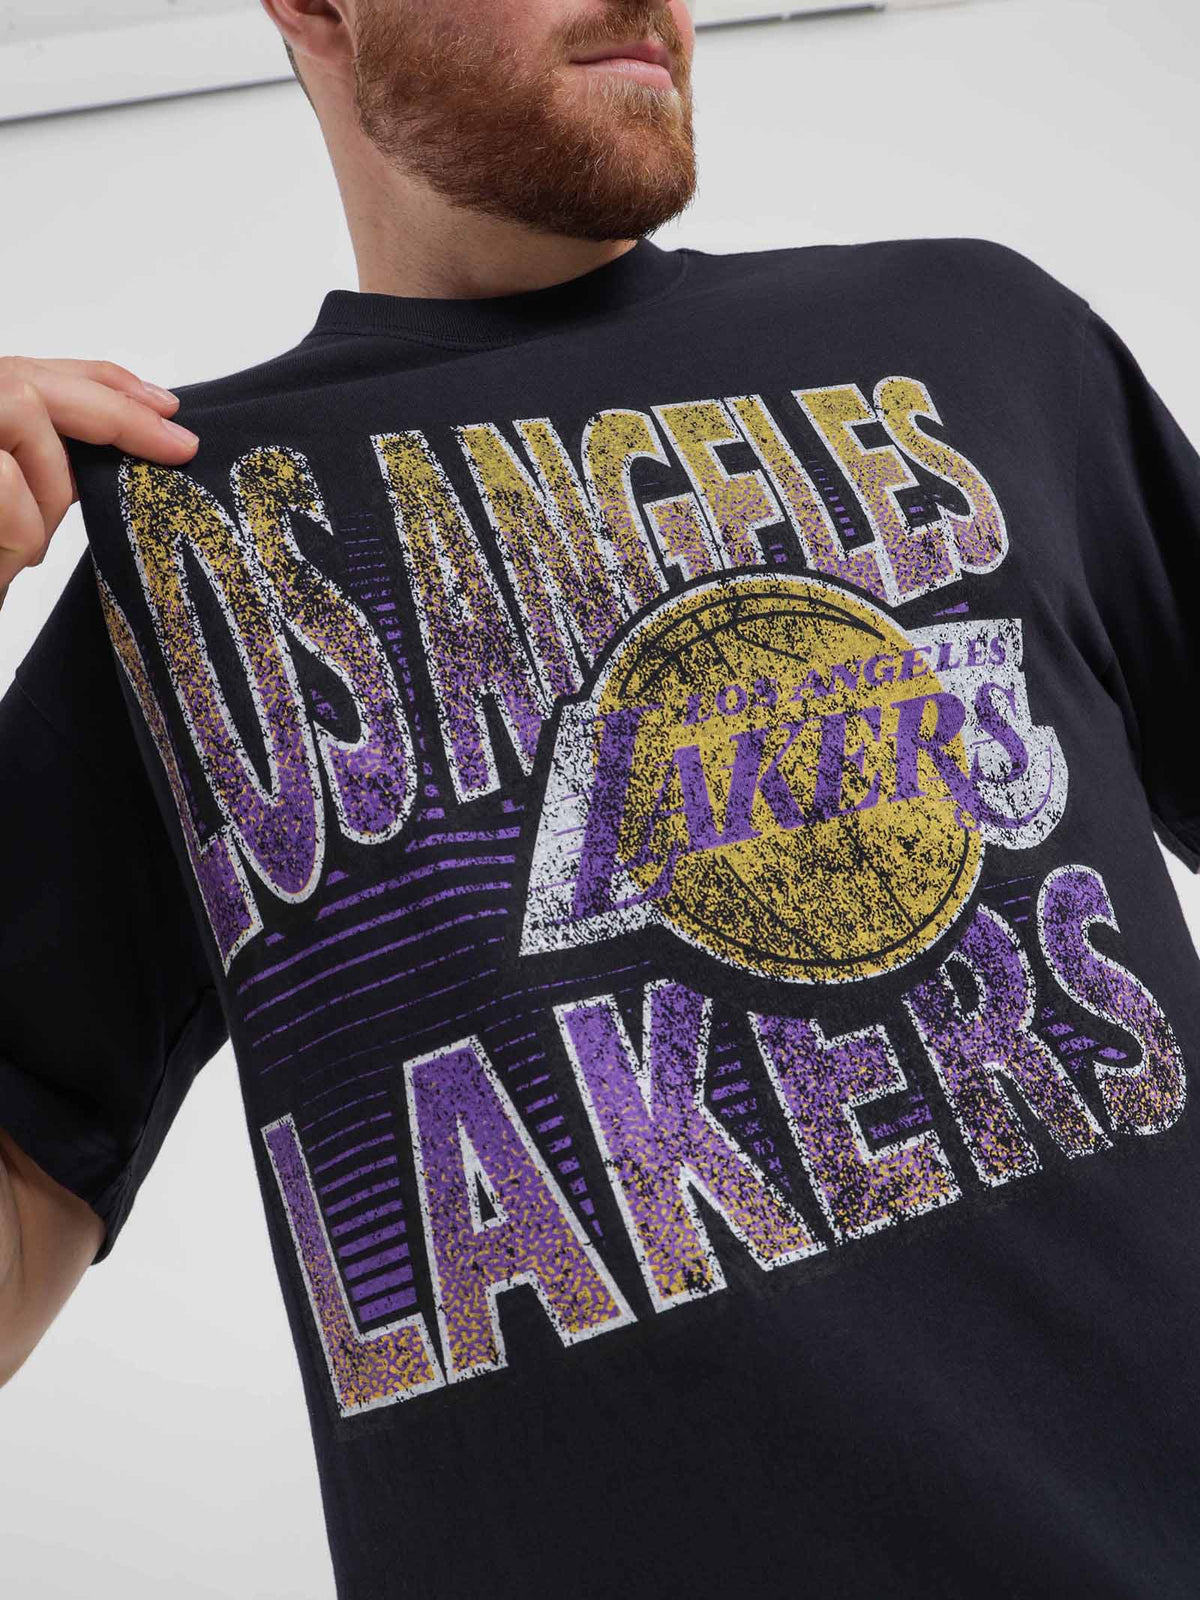 Incline Stack Lakers T-Shirt in Faded Black